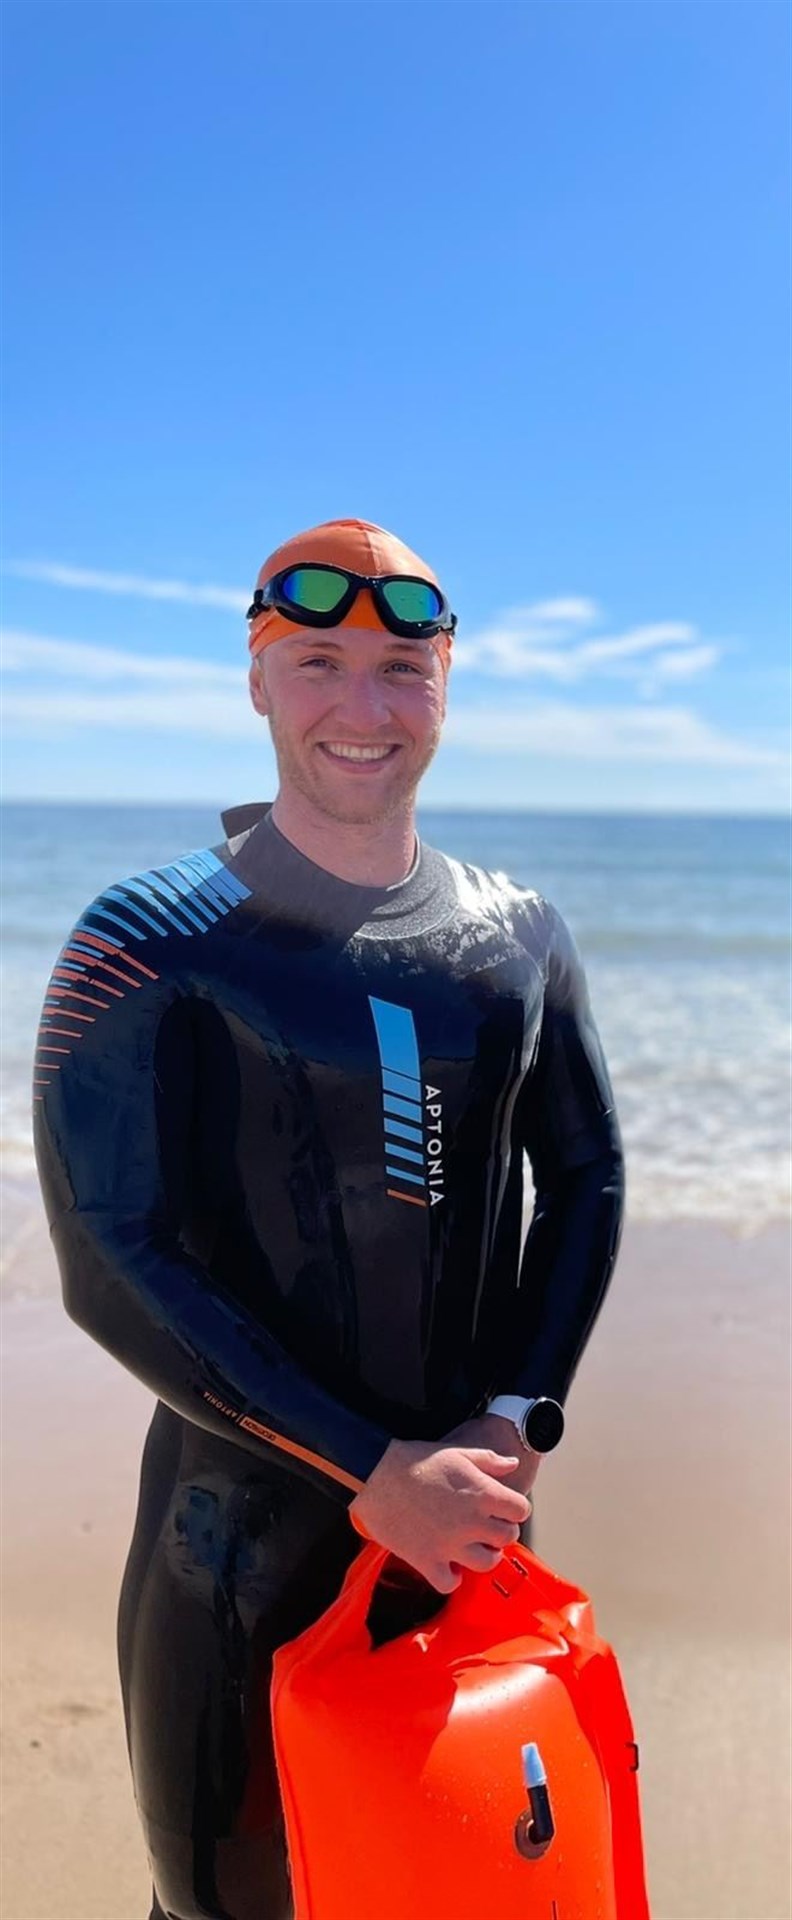 Ross Sutherland Rugby Club's development officer John Mann is set to take on seven triathlons in seven days to raise funds for the club and Alzheimer's Scotland.